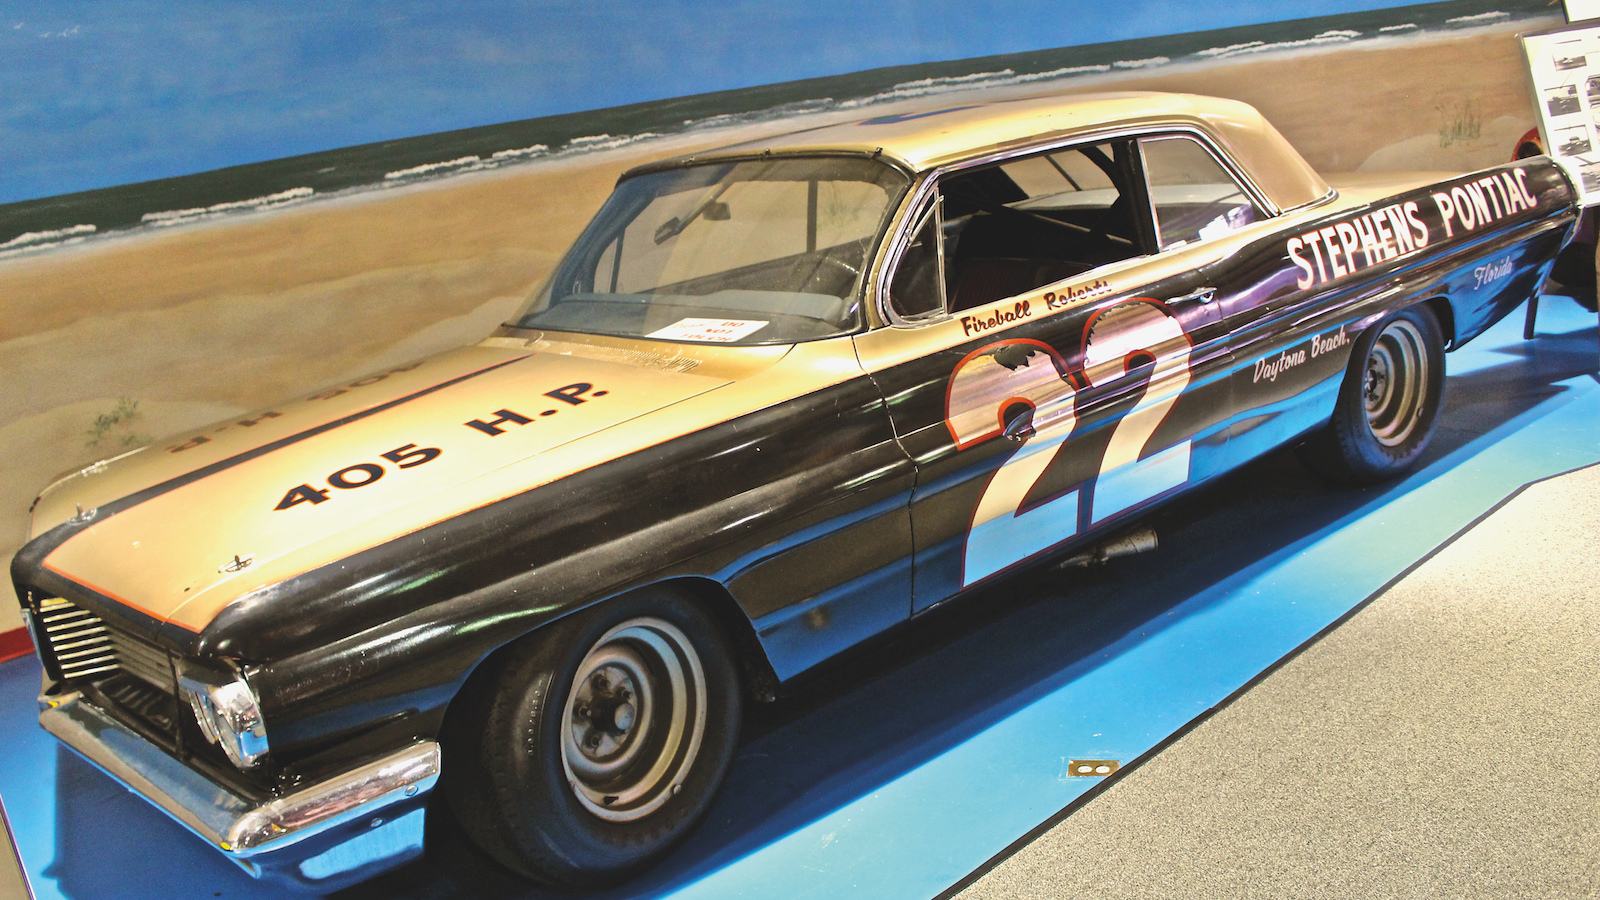 The two museums every Nascar fan must visit